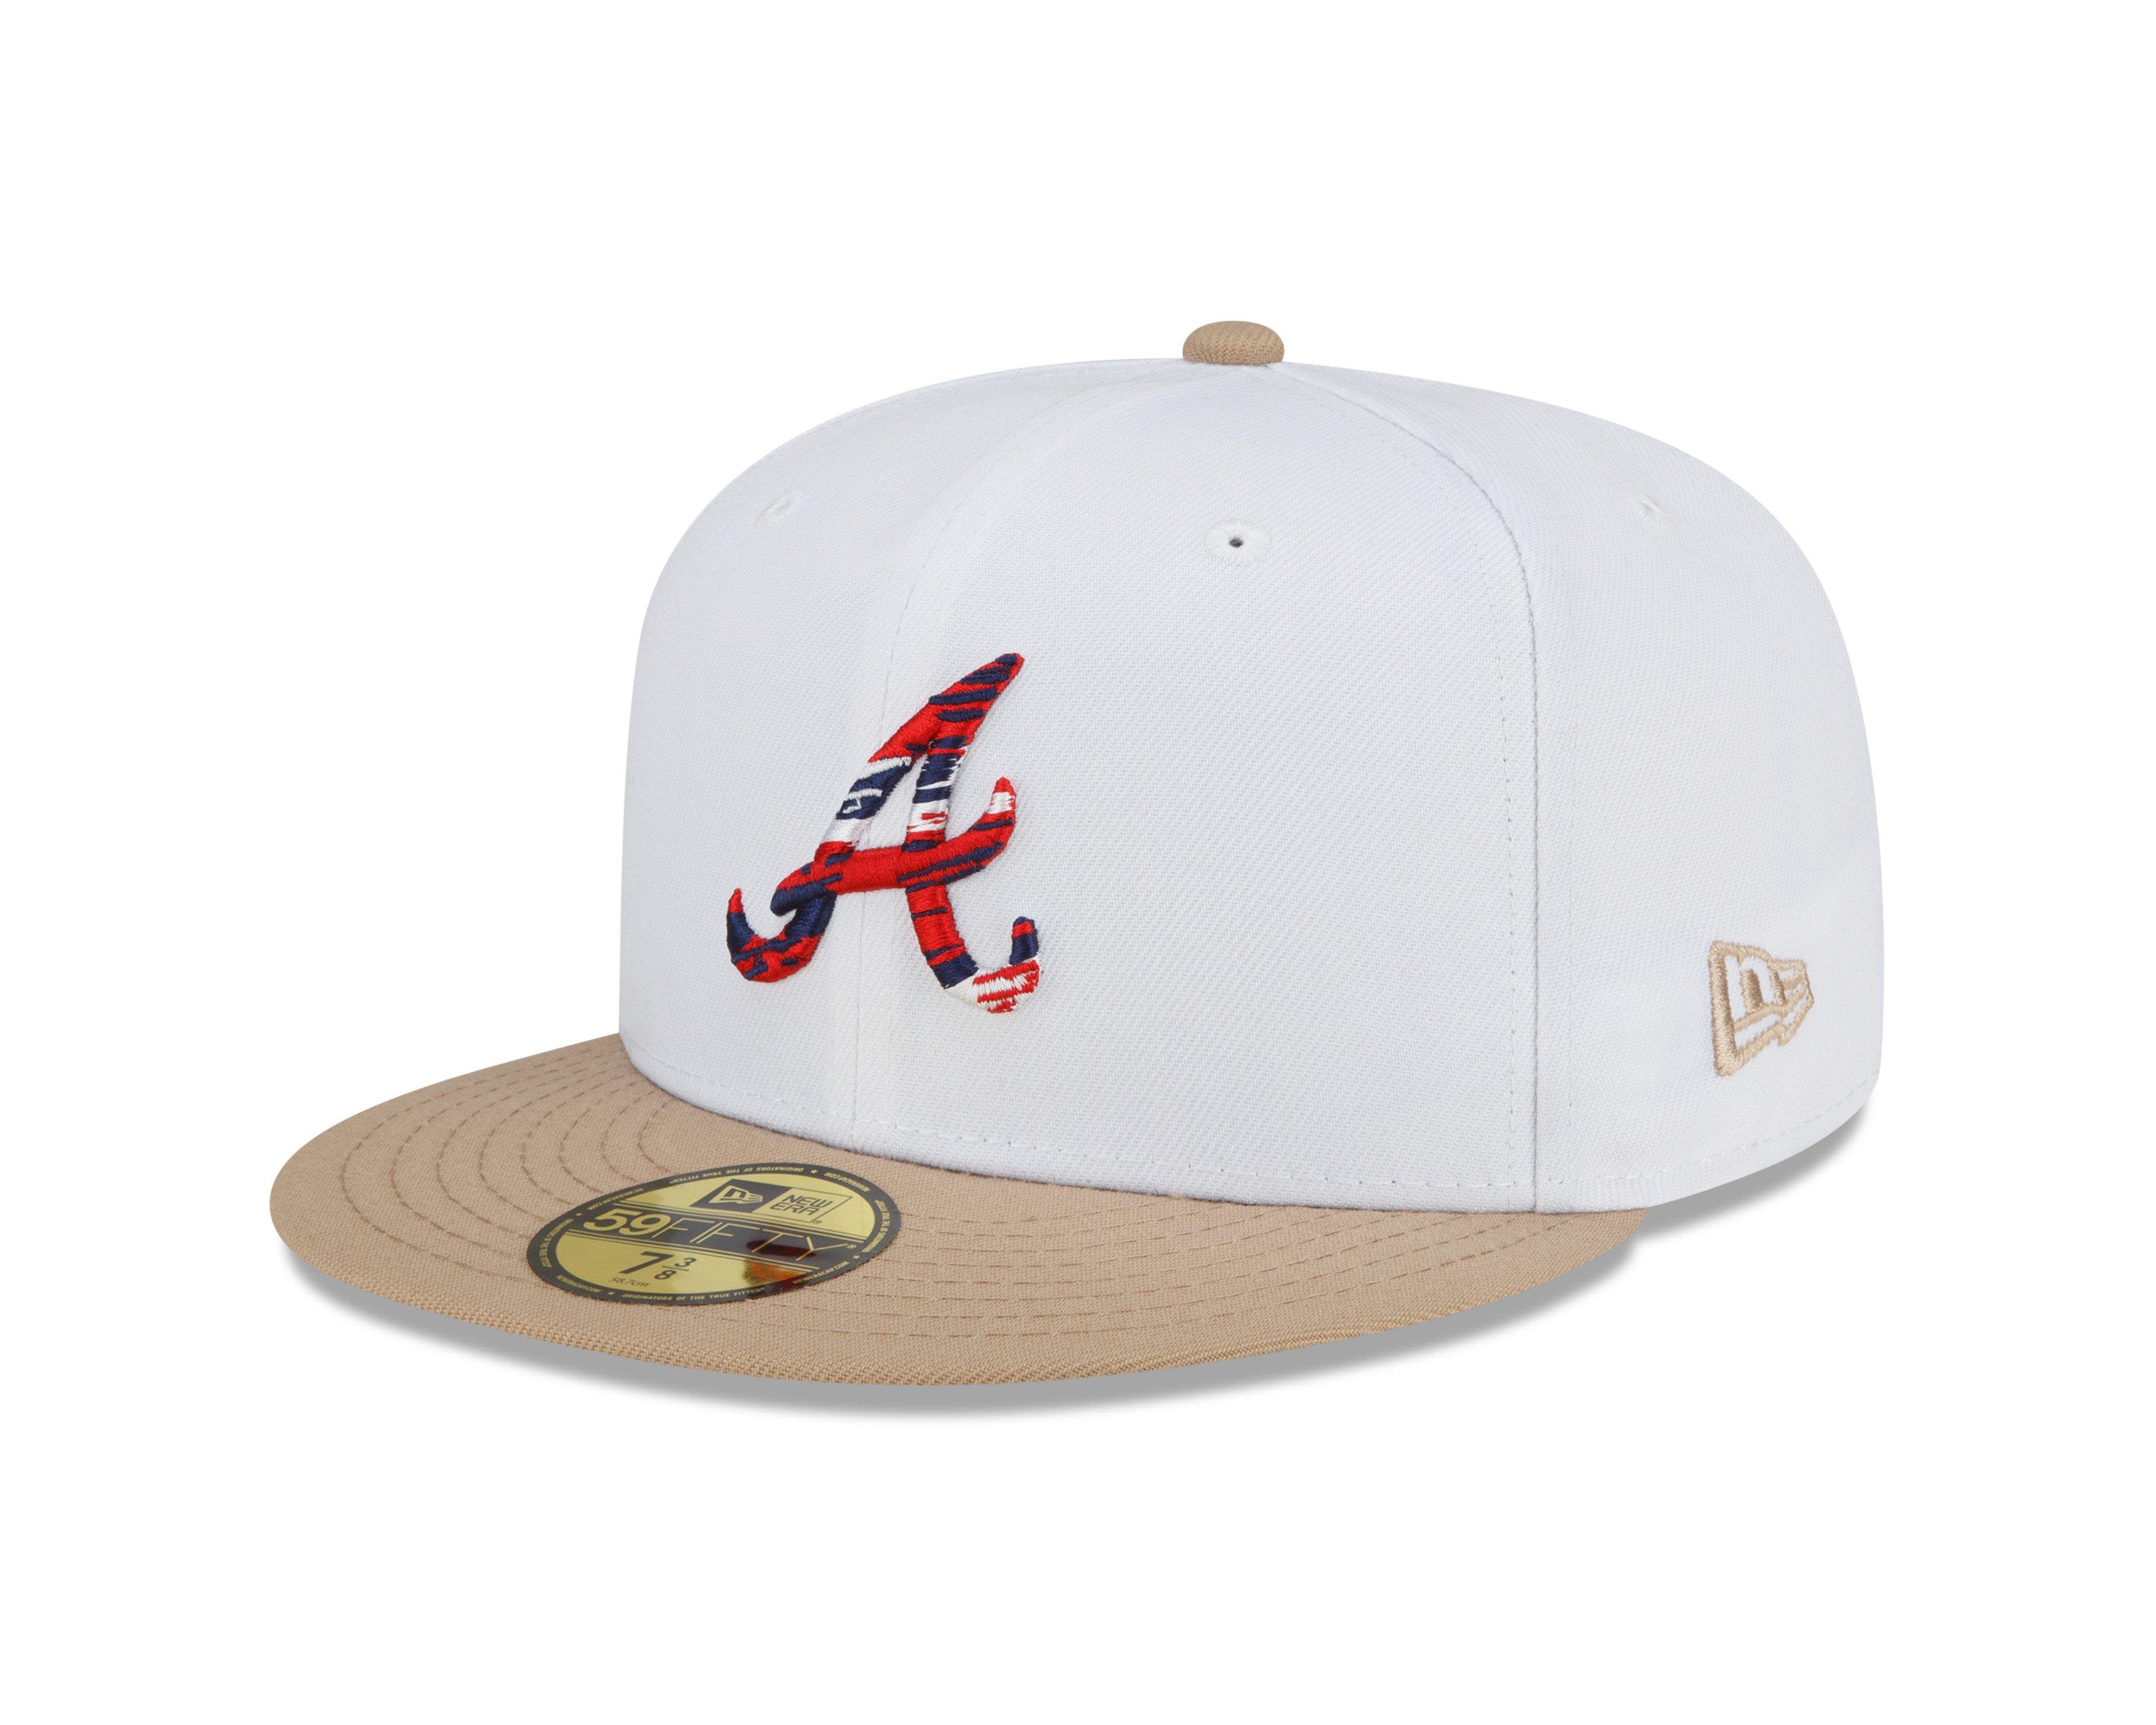 Stars and Stripes: Get your Atlanta Braves July 4th hats now